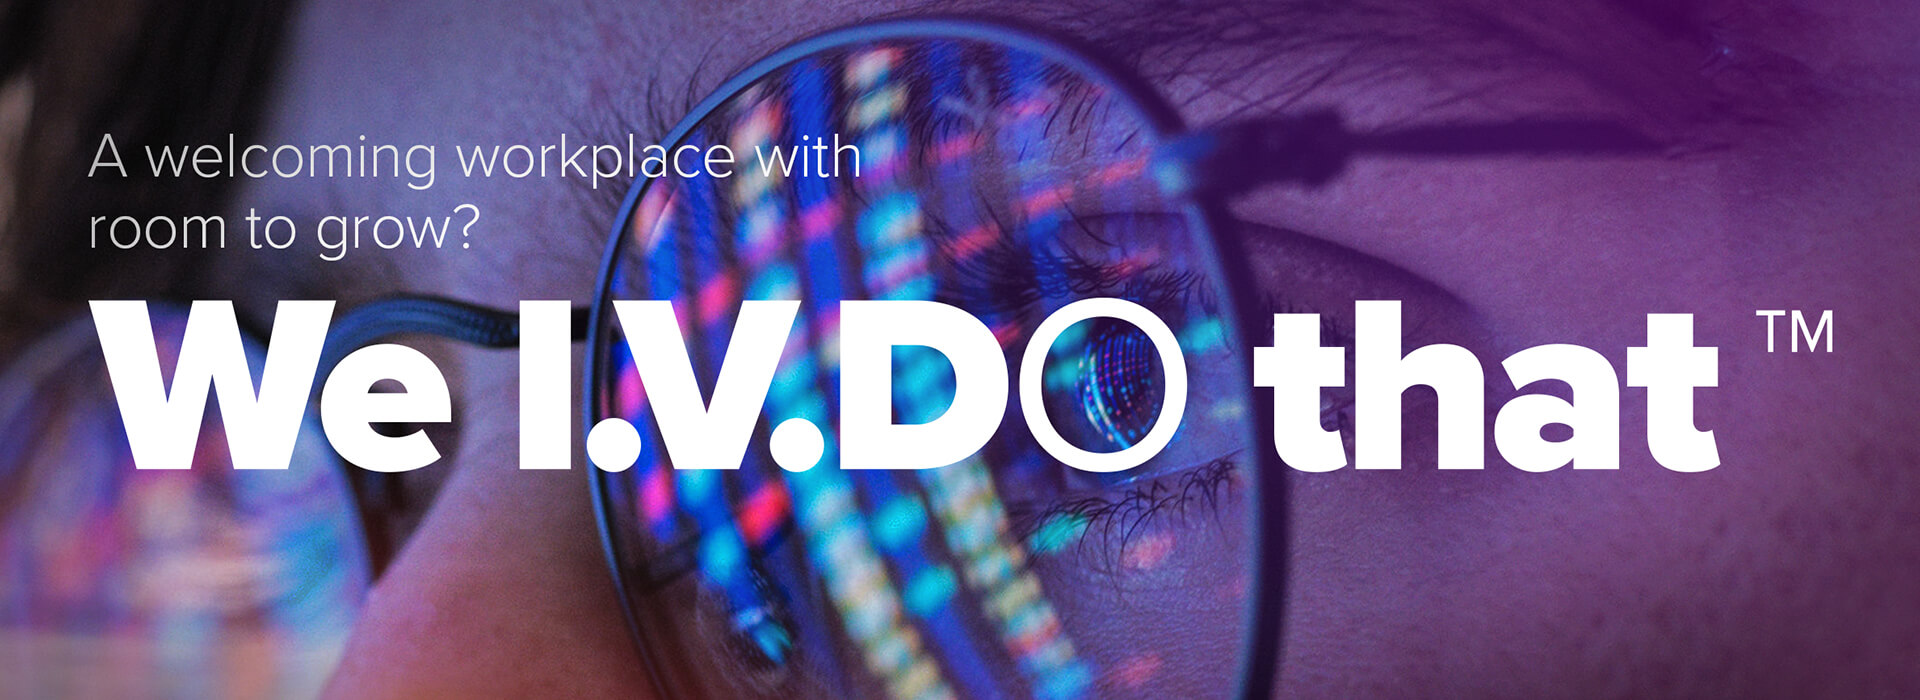 A welcoming workplace with room to grow? We IVDo that.